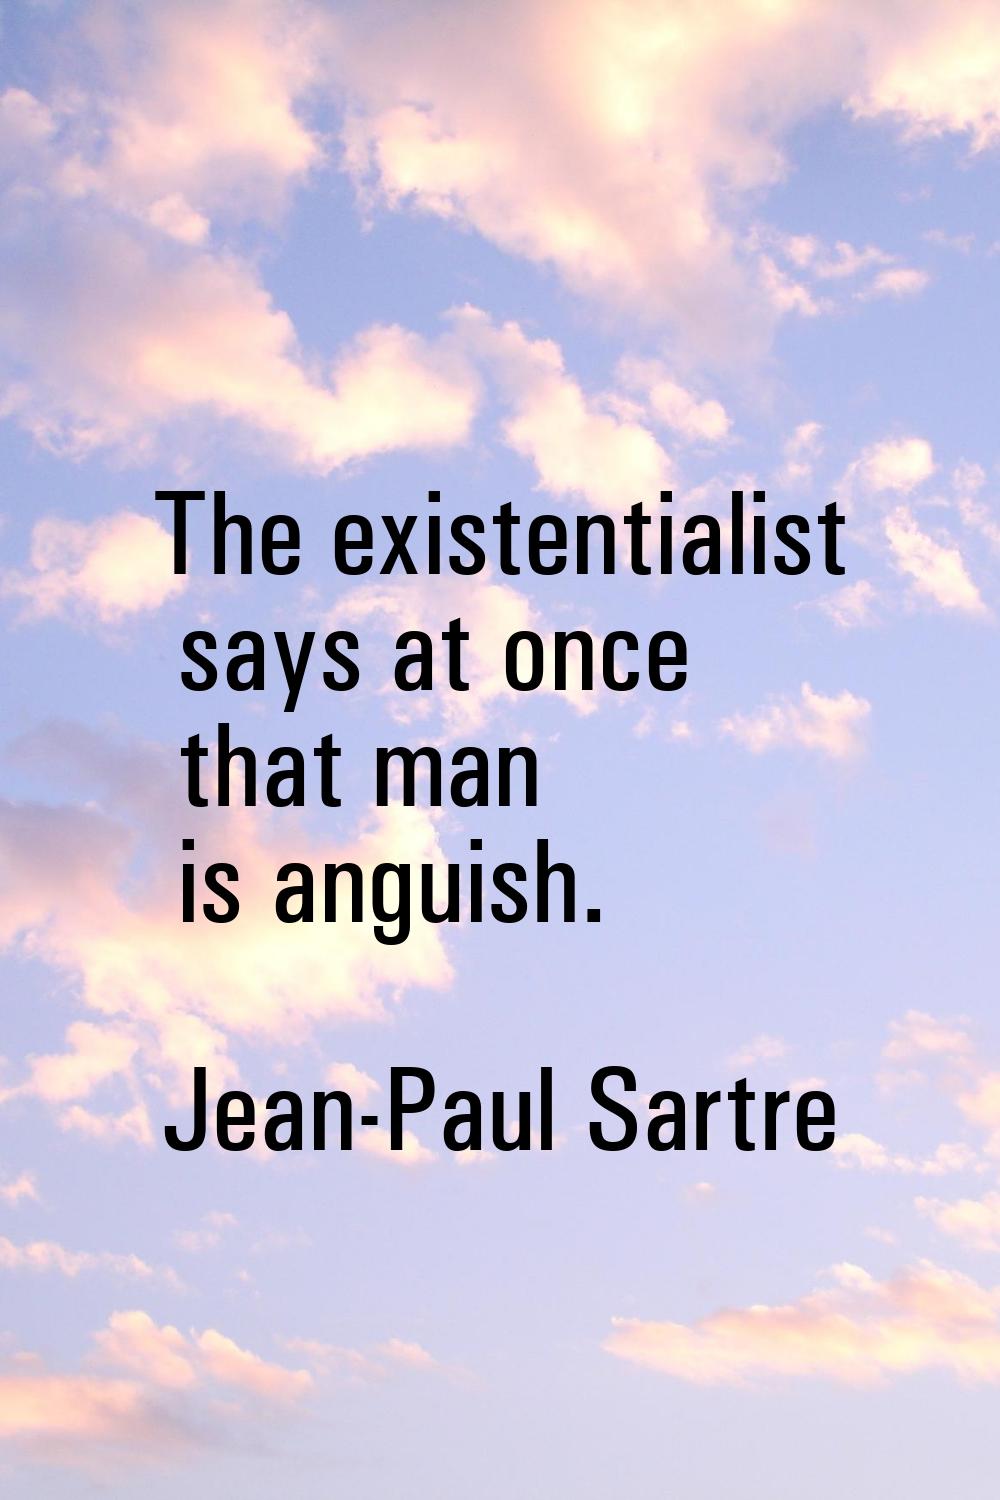 The existentialist says at once that man is anguish.